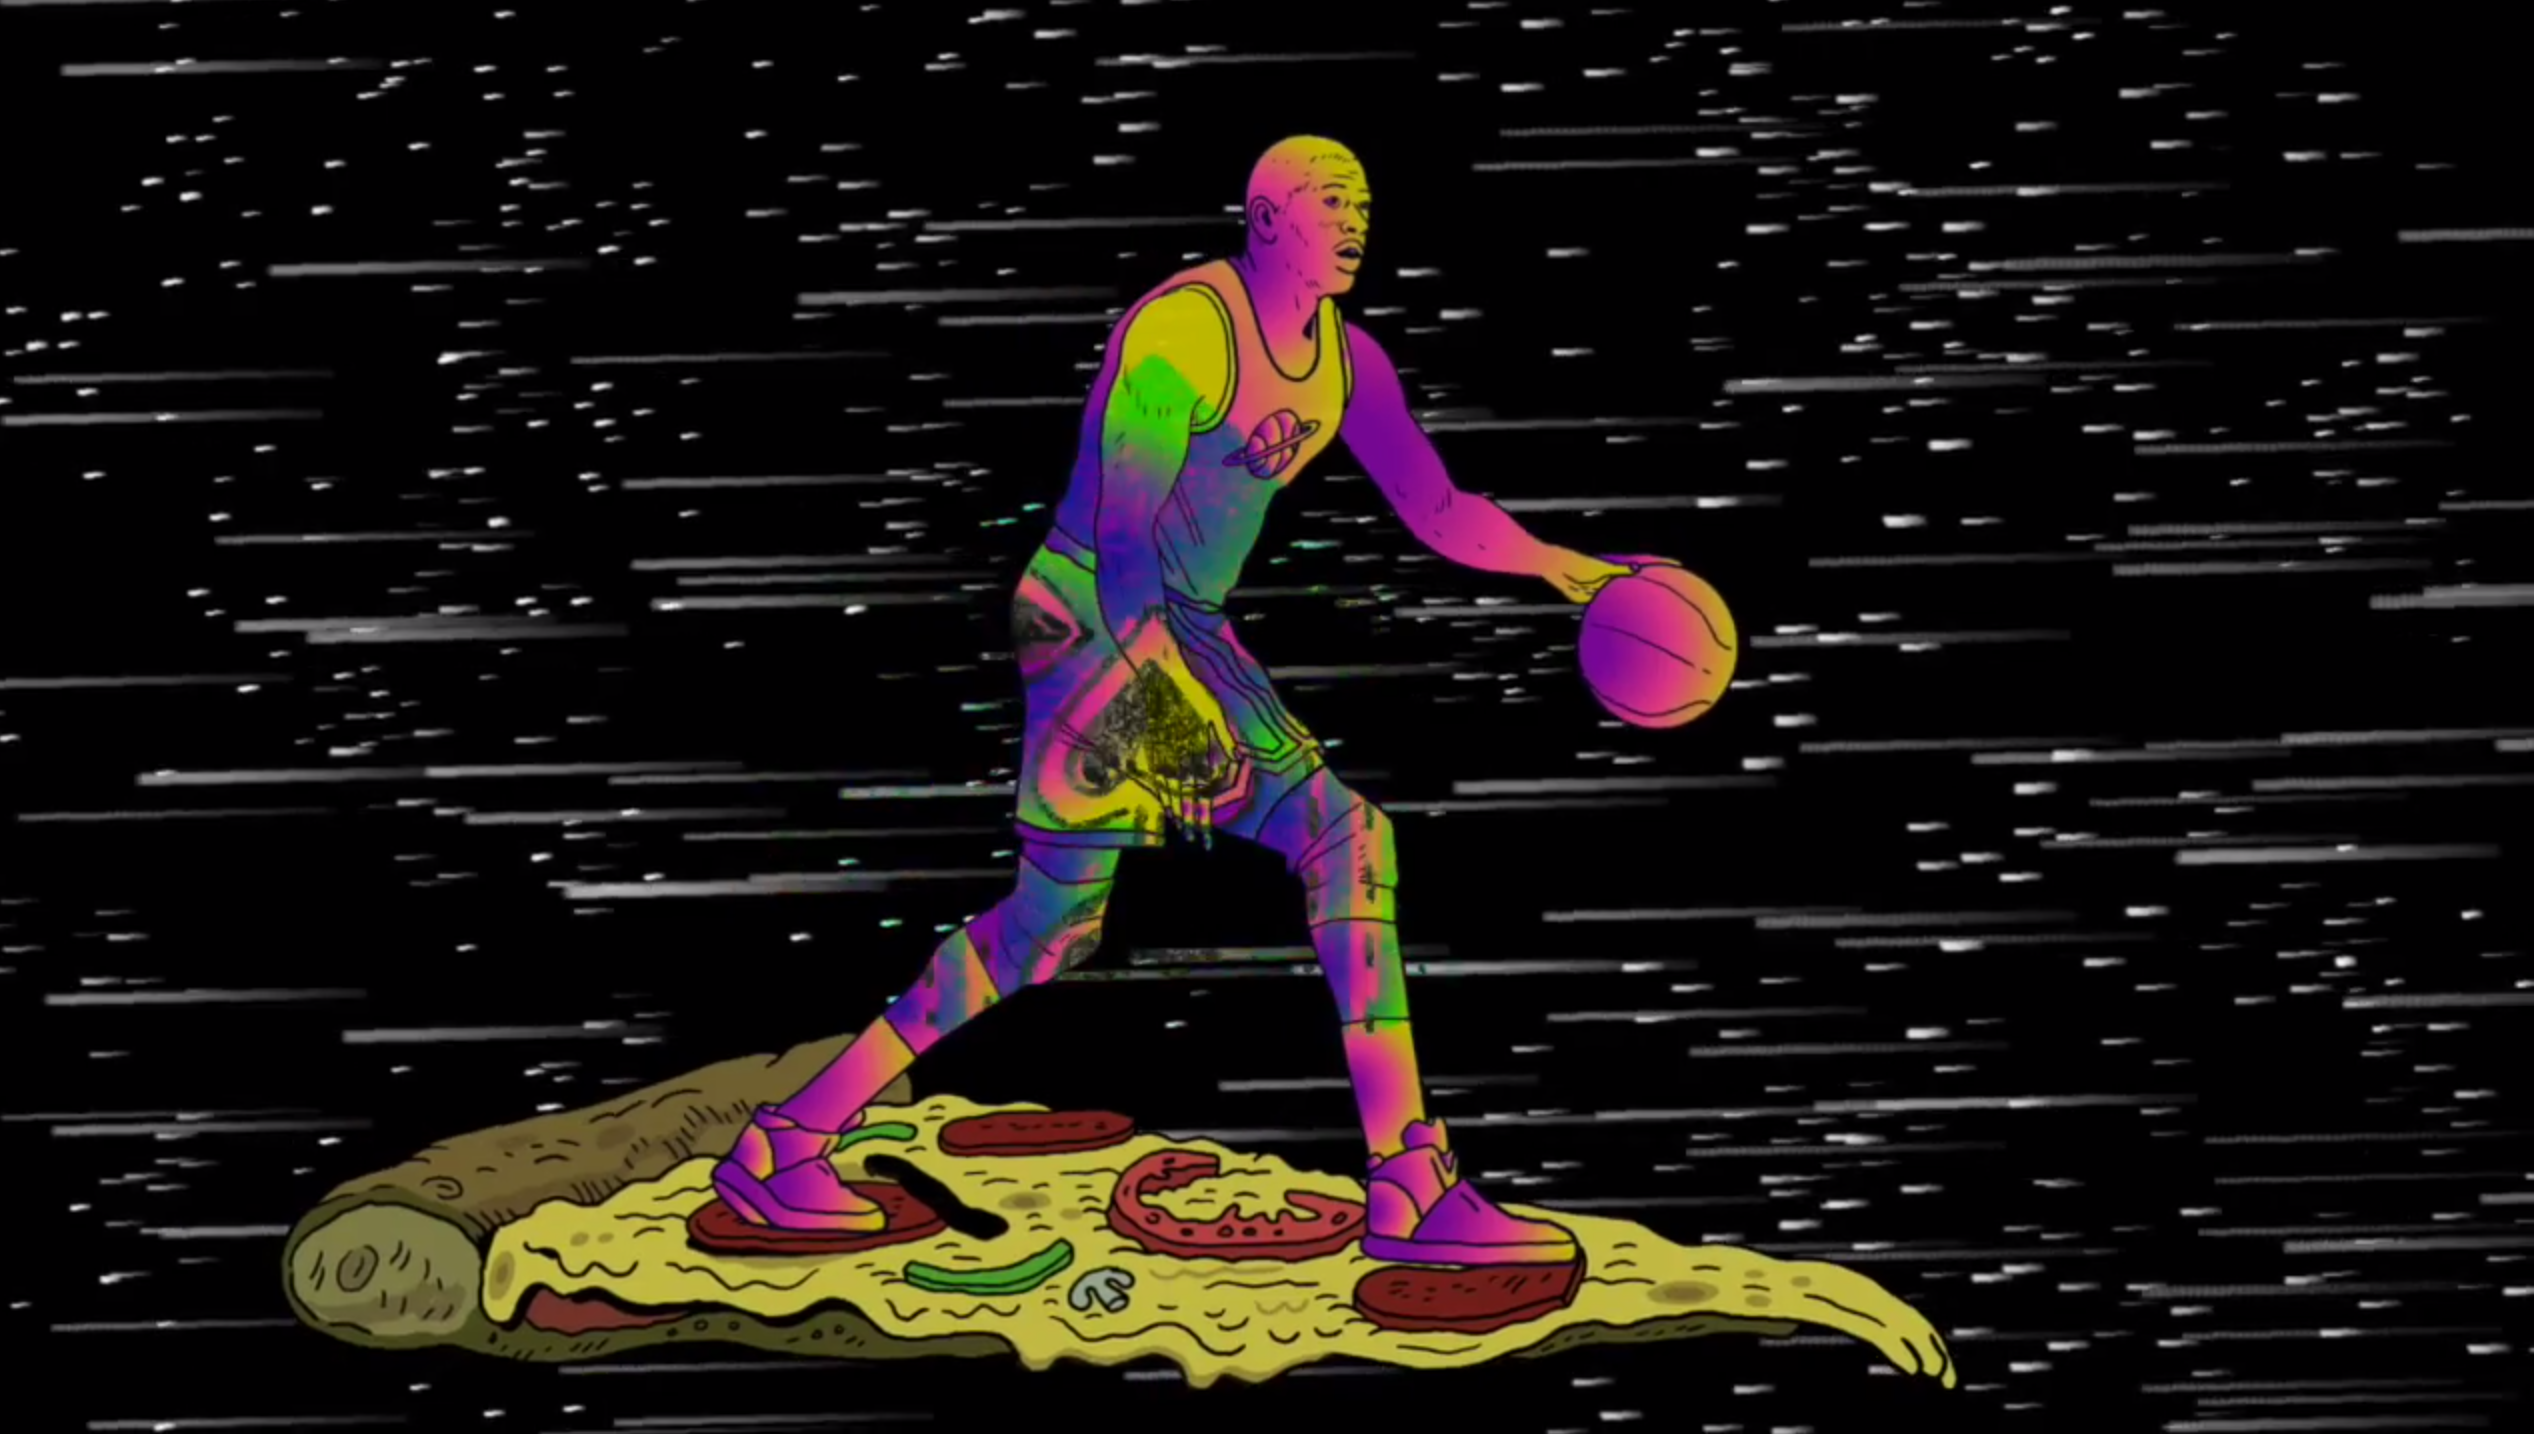 Basketball + Space Pizza = Yes.